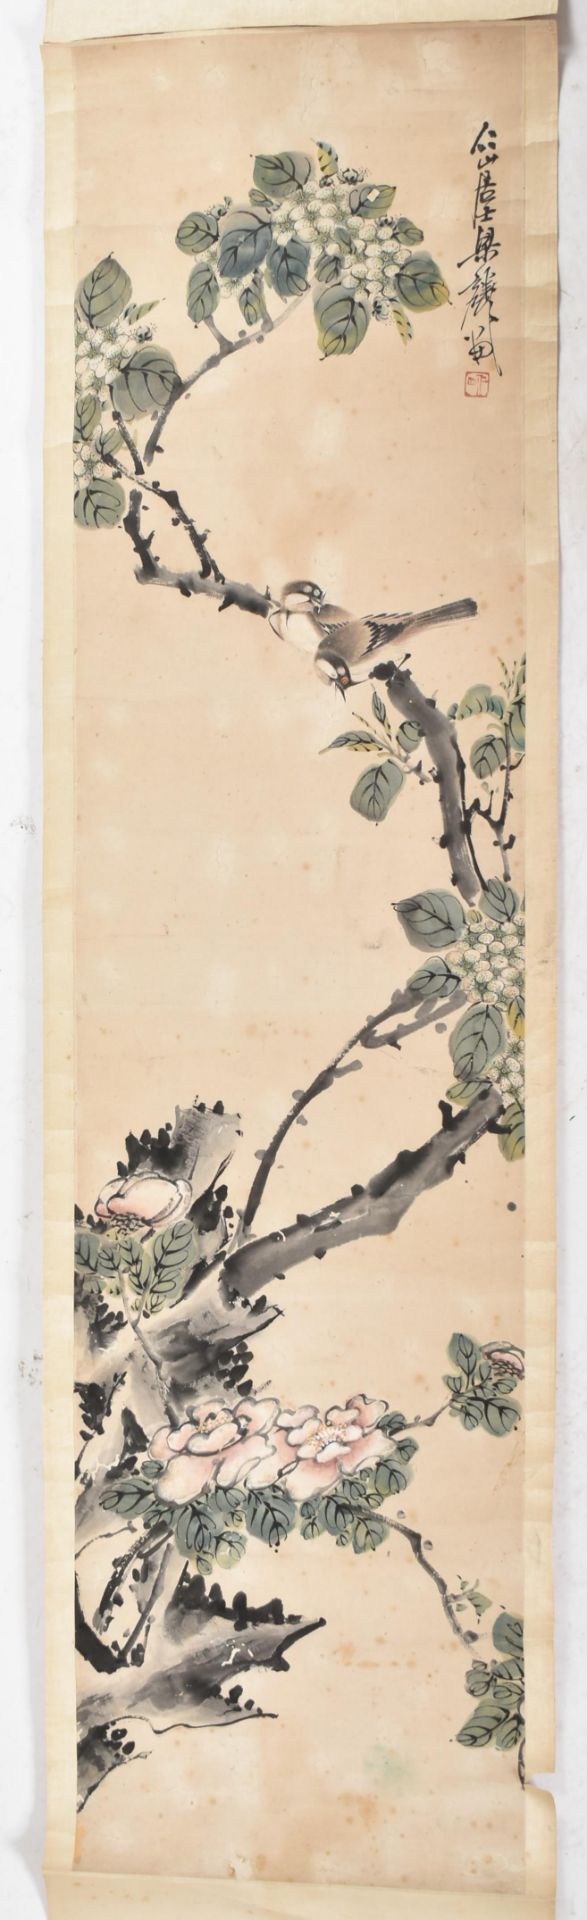 AFTER LIANG LING 梁麟（款）(MING DYNASTY) BIRDS AND FLOWERS - Image 2 of 8